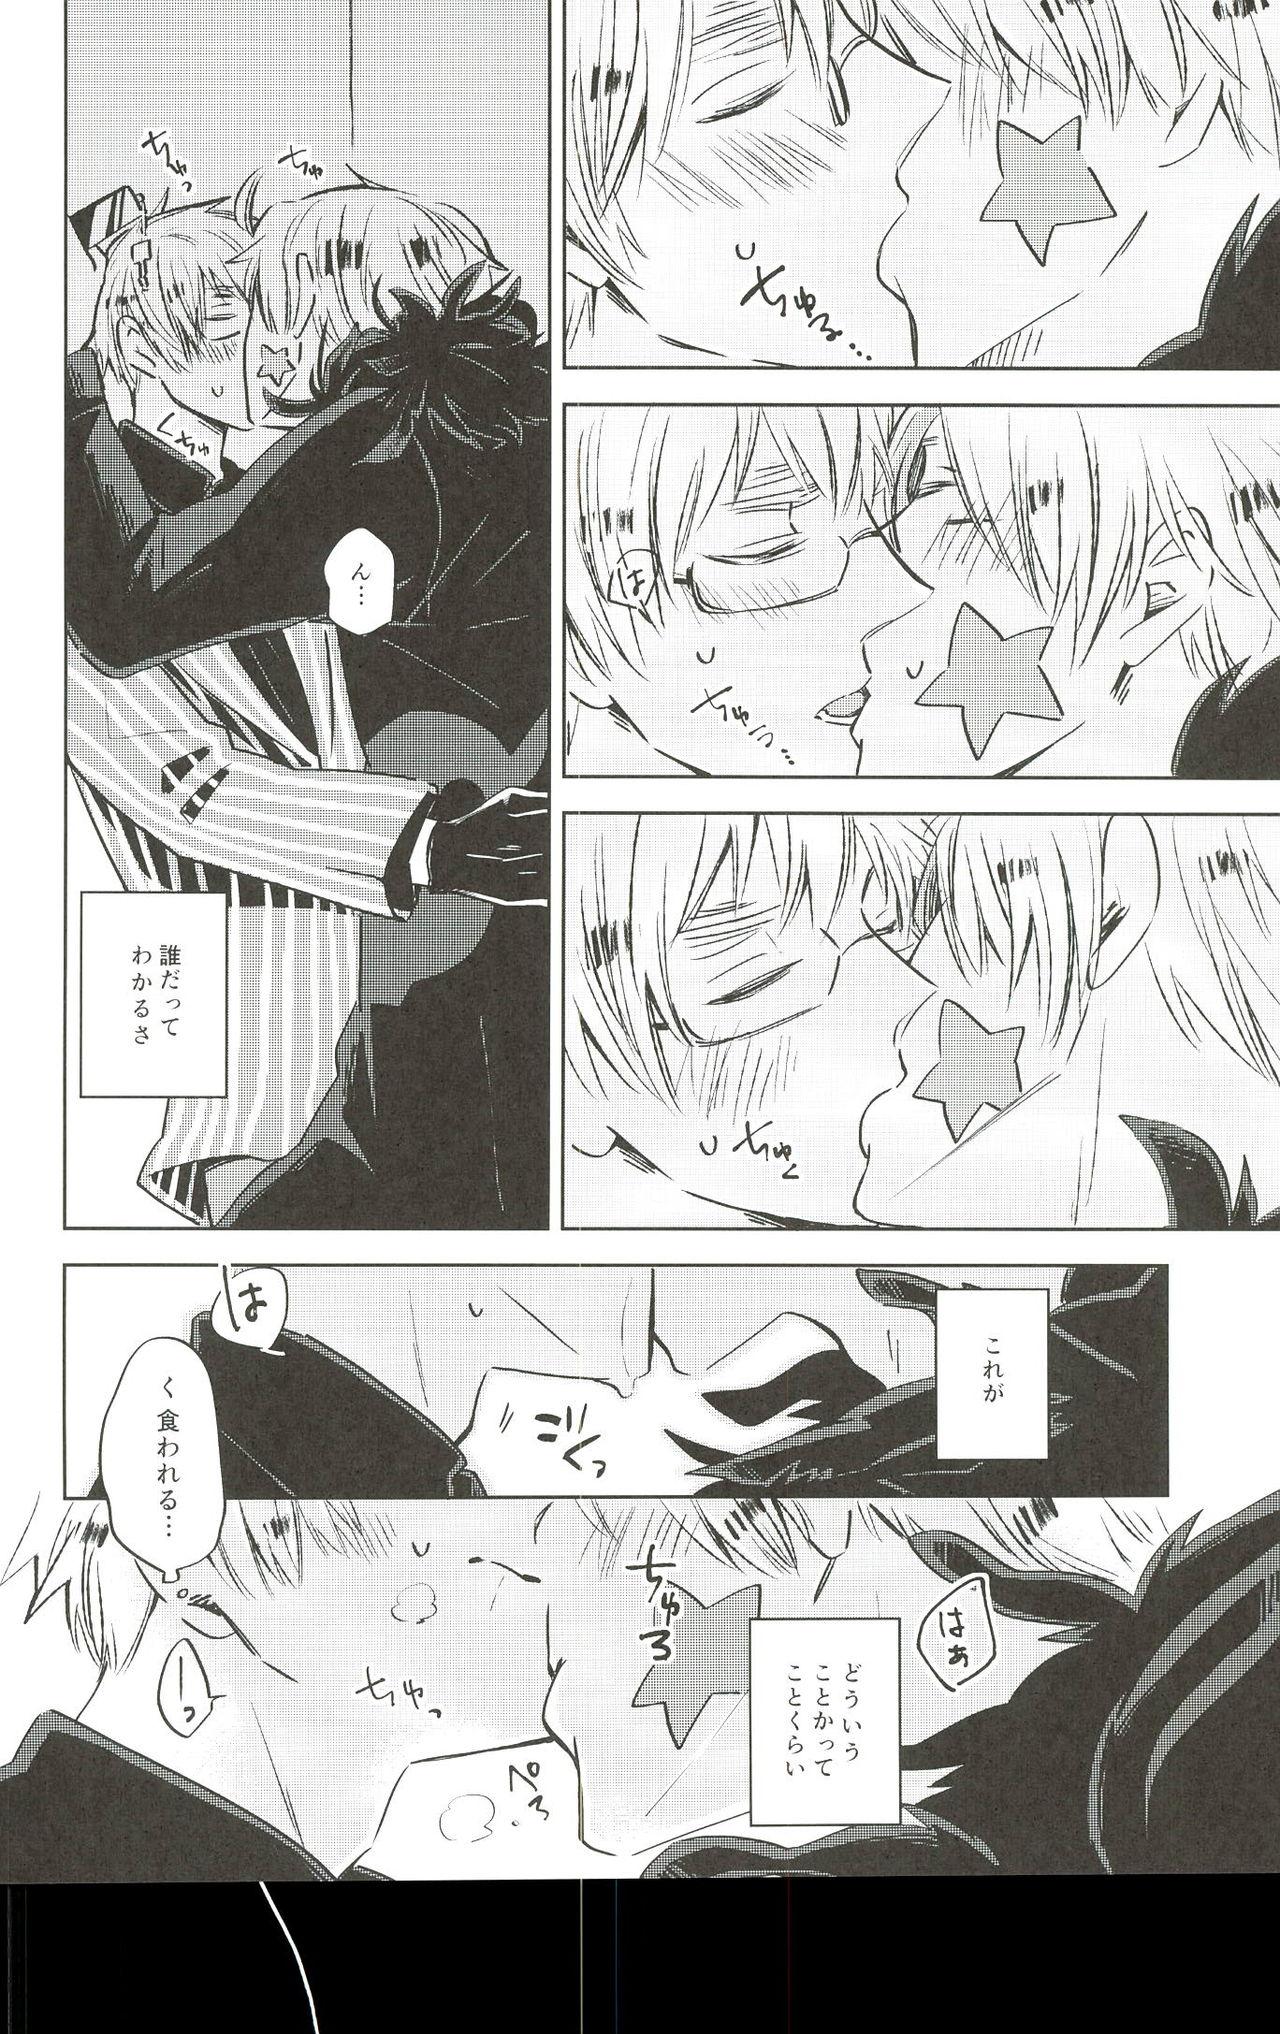 Black Ameagari no Slip Out - Axis powers hetalia Pussylicking - Page 5